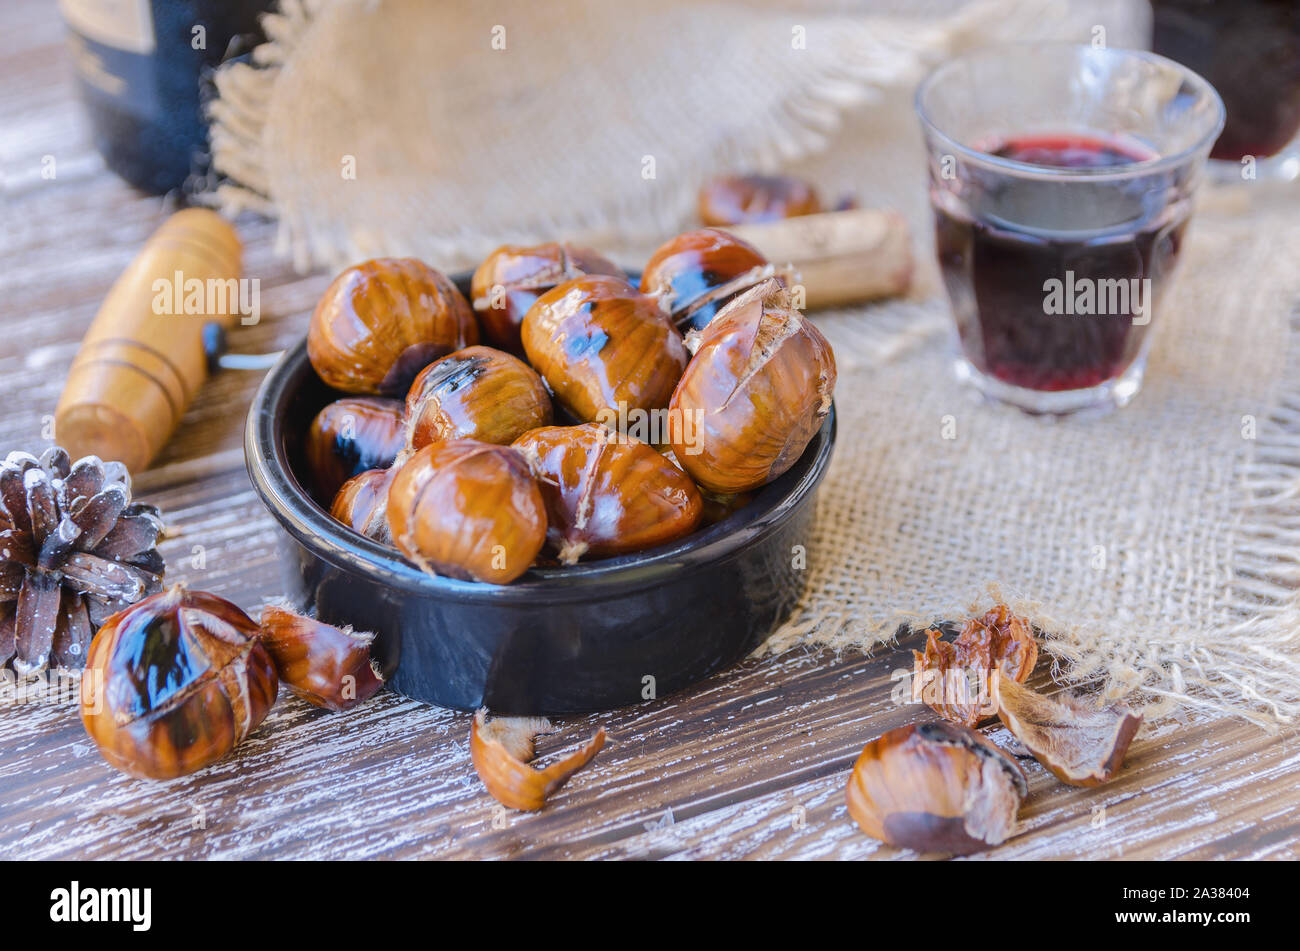 Tasty roasted chestnuts on ceramic bowl served with red wine on wooden rustic table. Festive winter holiday treats background. Stock Photo